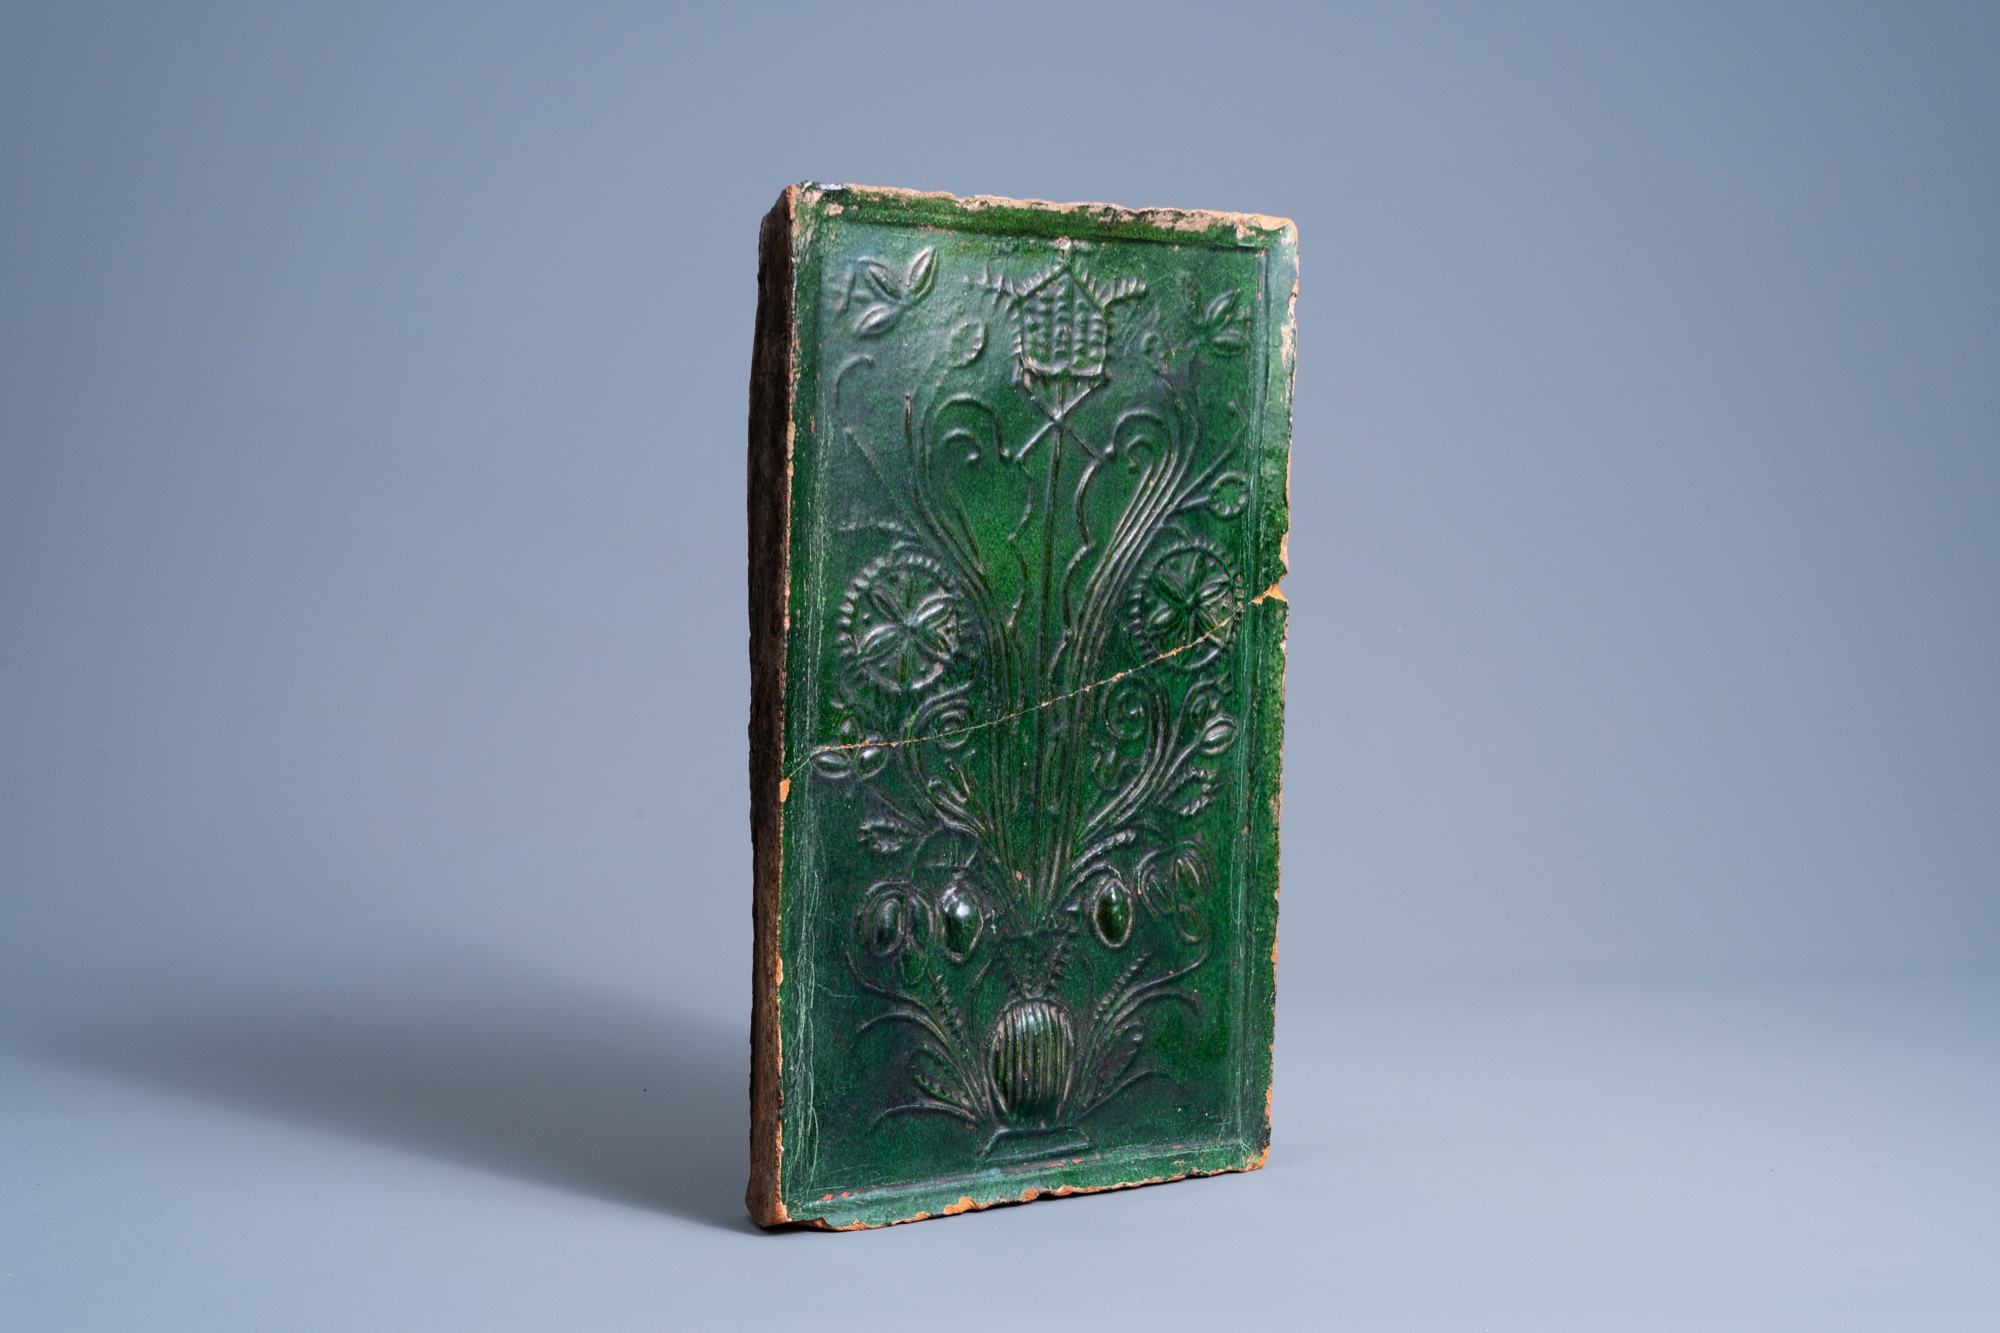 A German green glazed earthenware stove tile with floral design, 16th/17th C. - Image 3 of 3